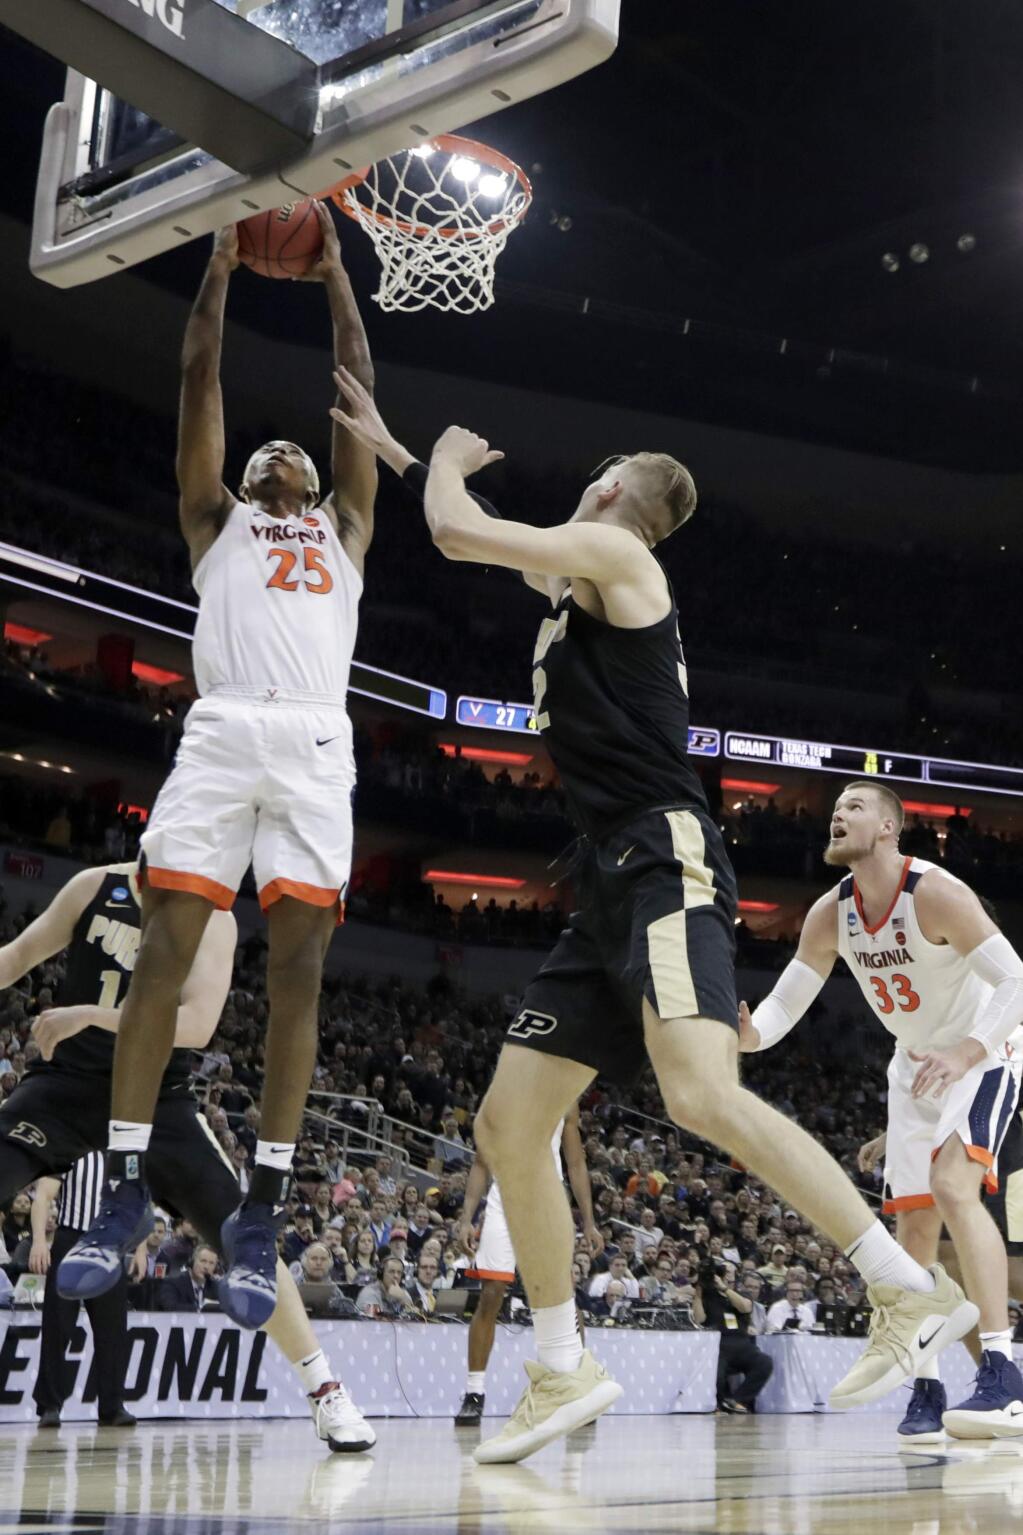 Virginia's Mamadi Diakite puts up a shot against Purdue's Matt Haarms, center, as Virginia's Jack Salt, right watches during the first half of the men's NCAA Tournament South Region final game, Saturday, March 30, 2019, in Louisville, Ky. (AP Photo/Michael Conroy)